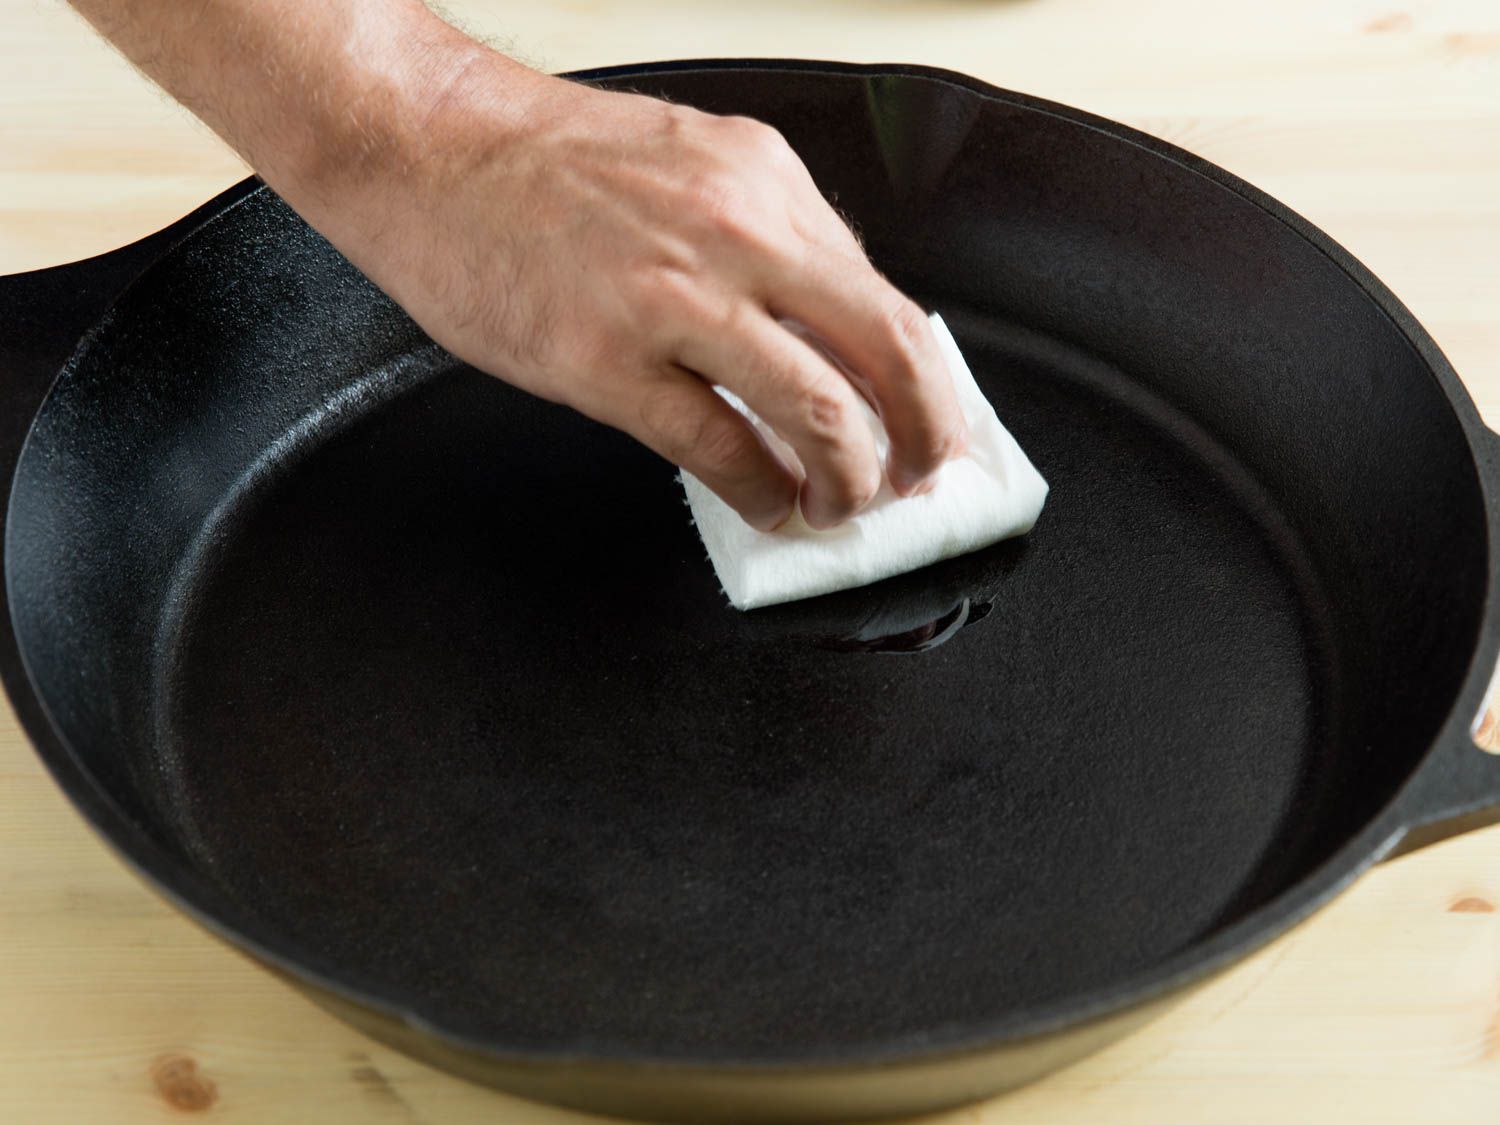 A hand wiping holding a paper towel and wiping the interior of a cast iron skillet with oil